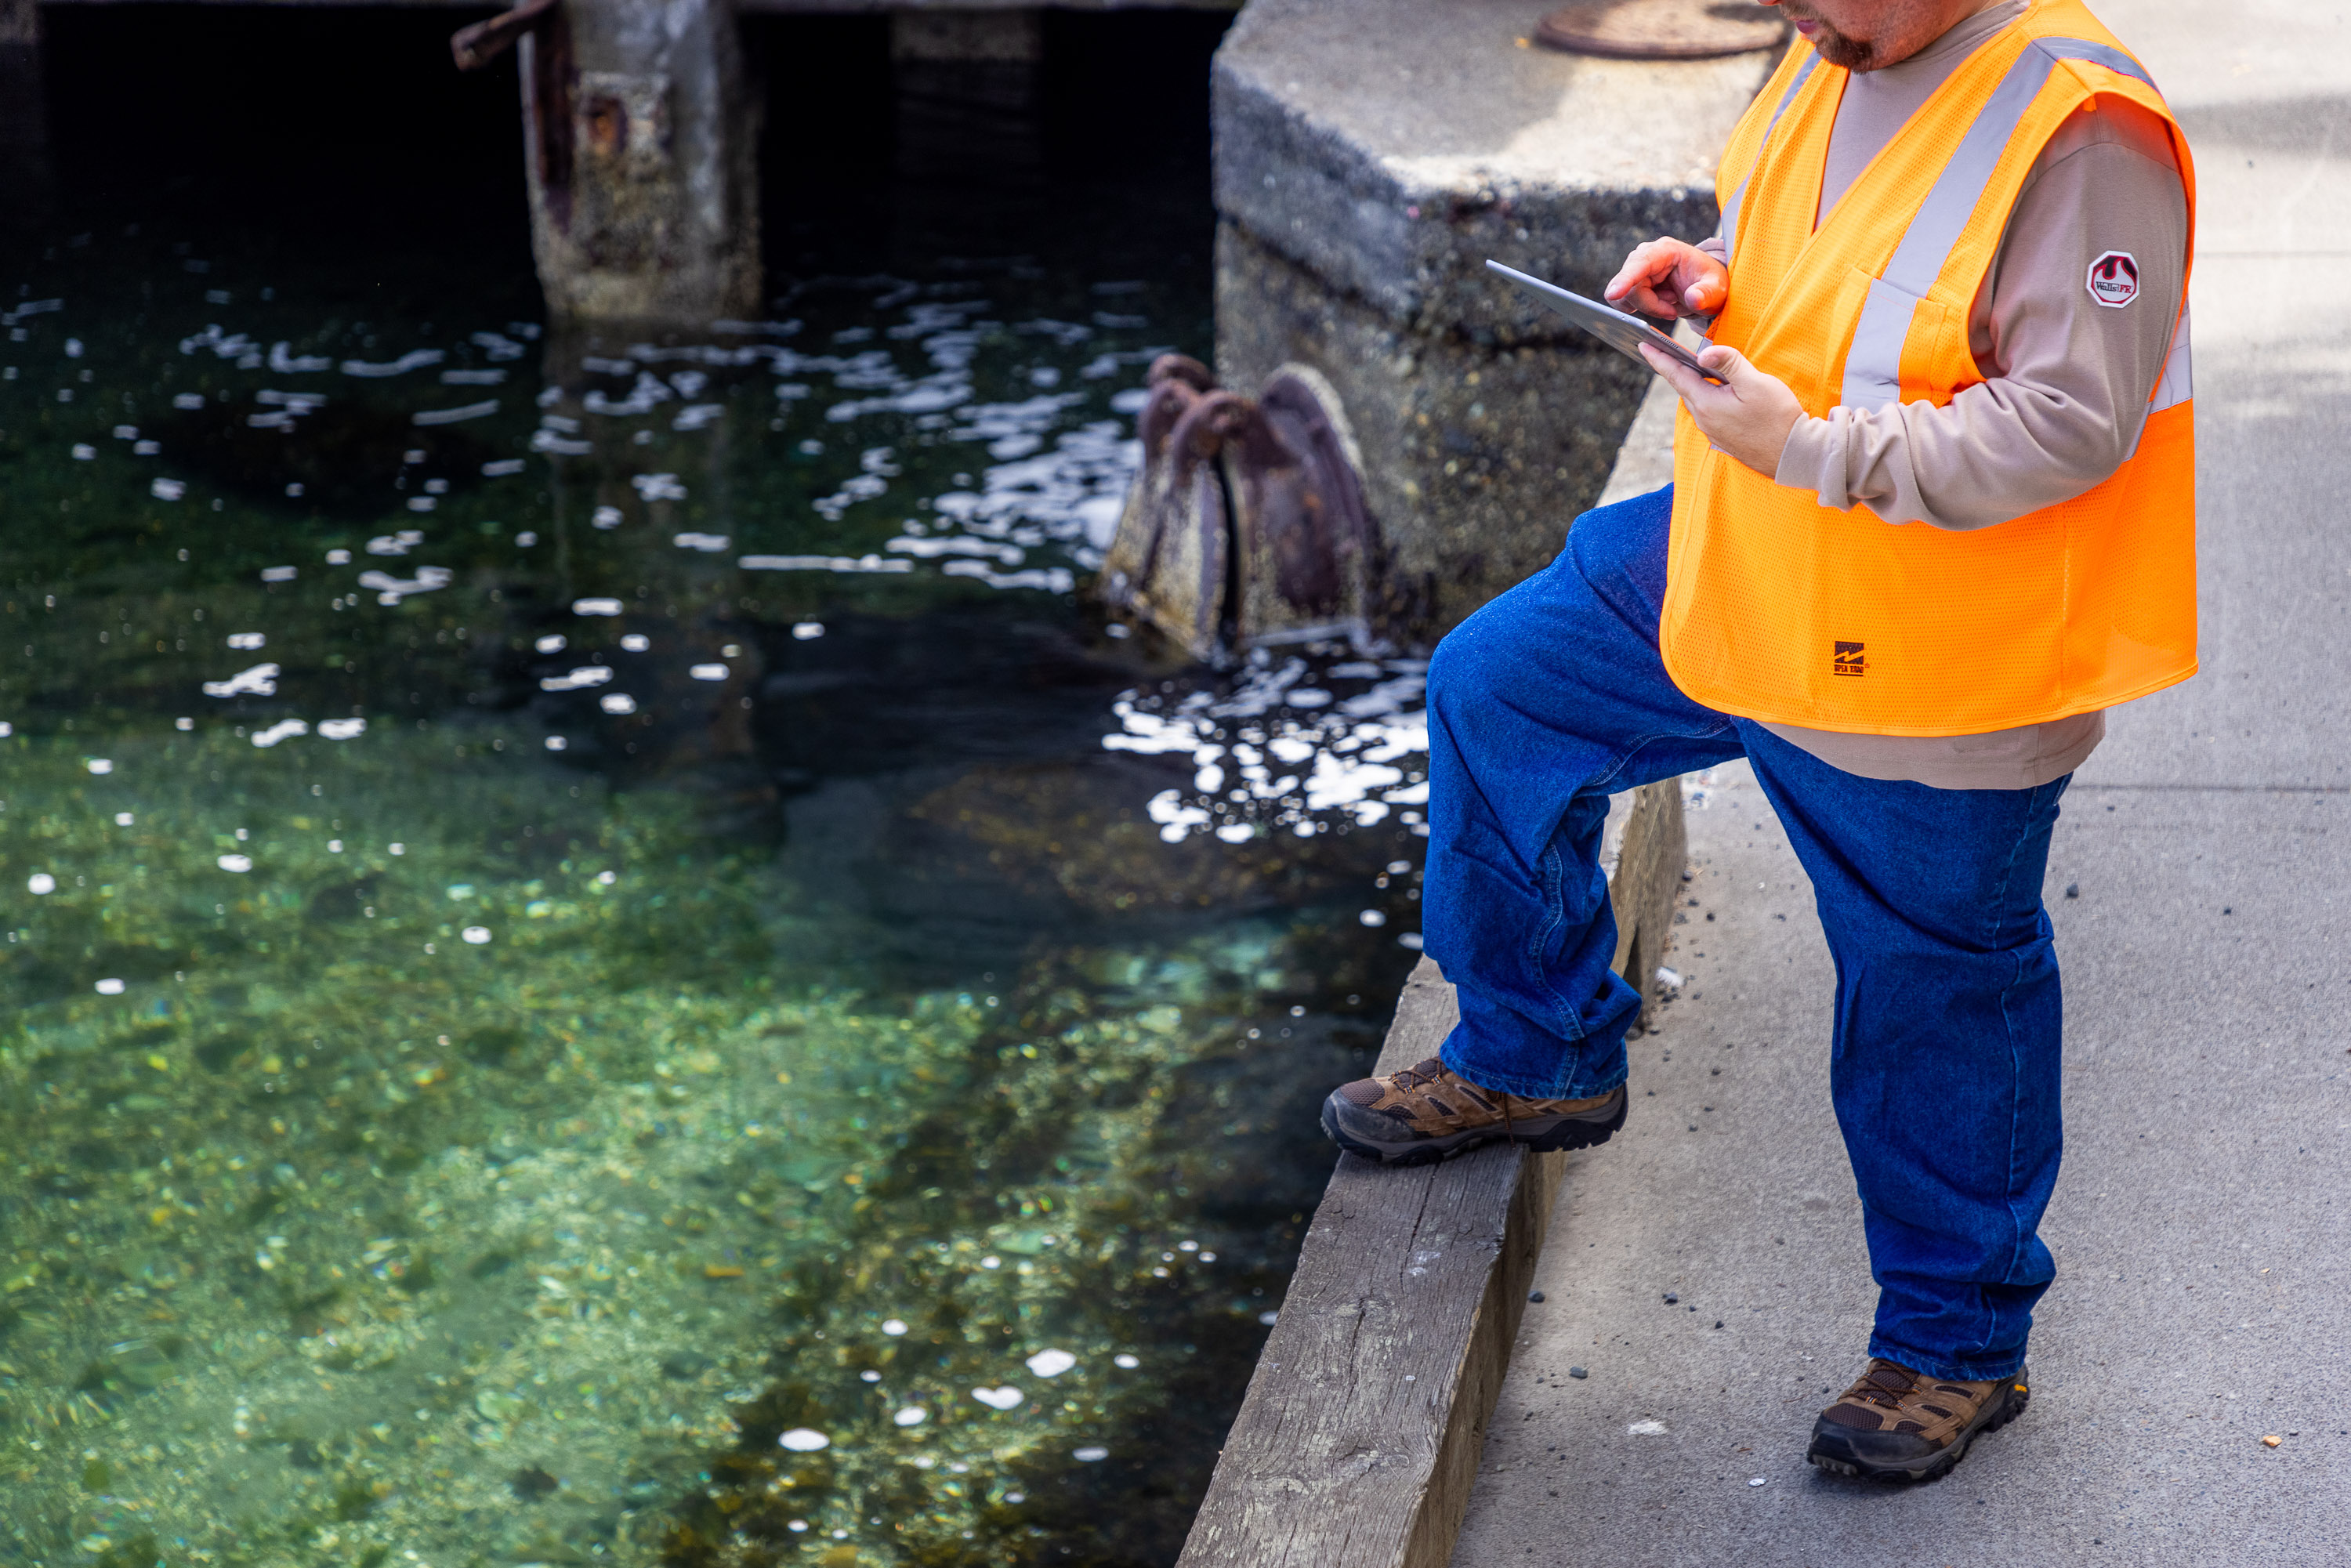 Complete routine outfall inspections and manage spill investigations with NPDESPro's IDDE and Outfall management modules.